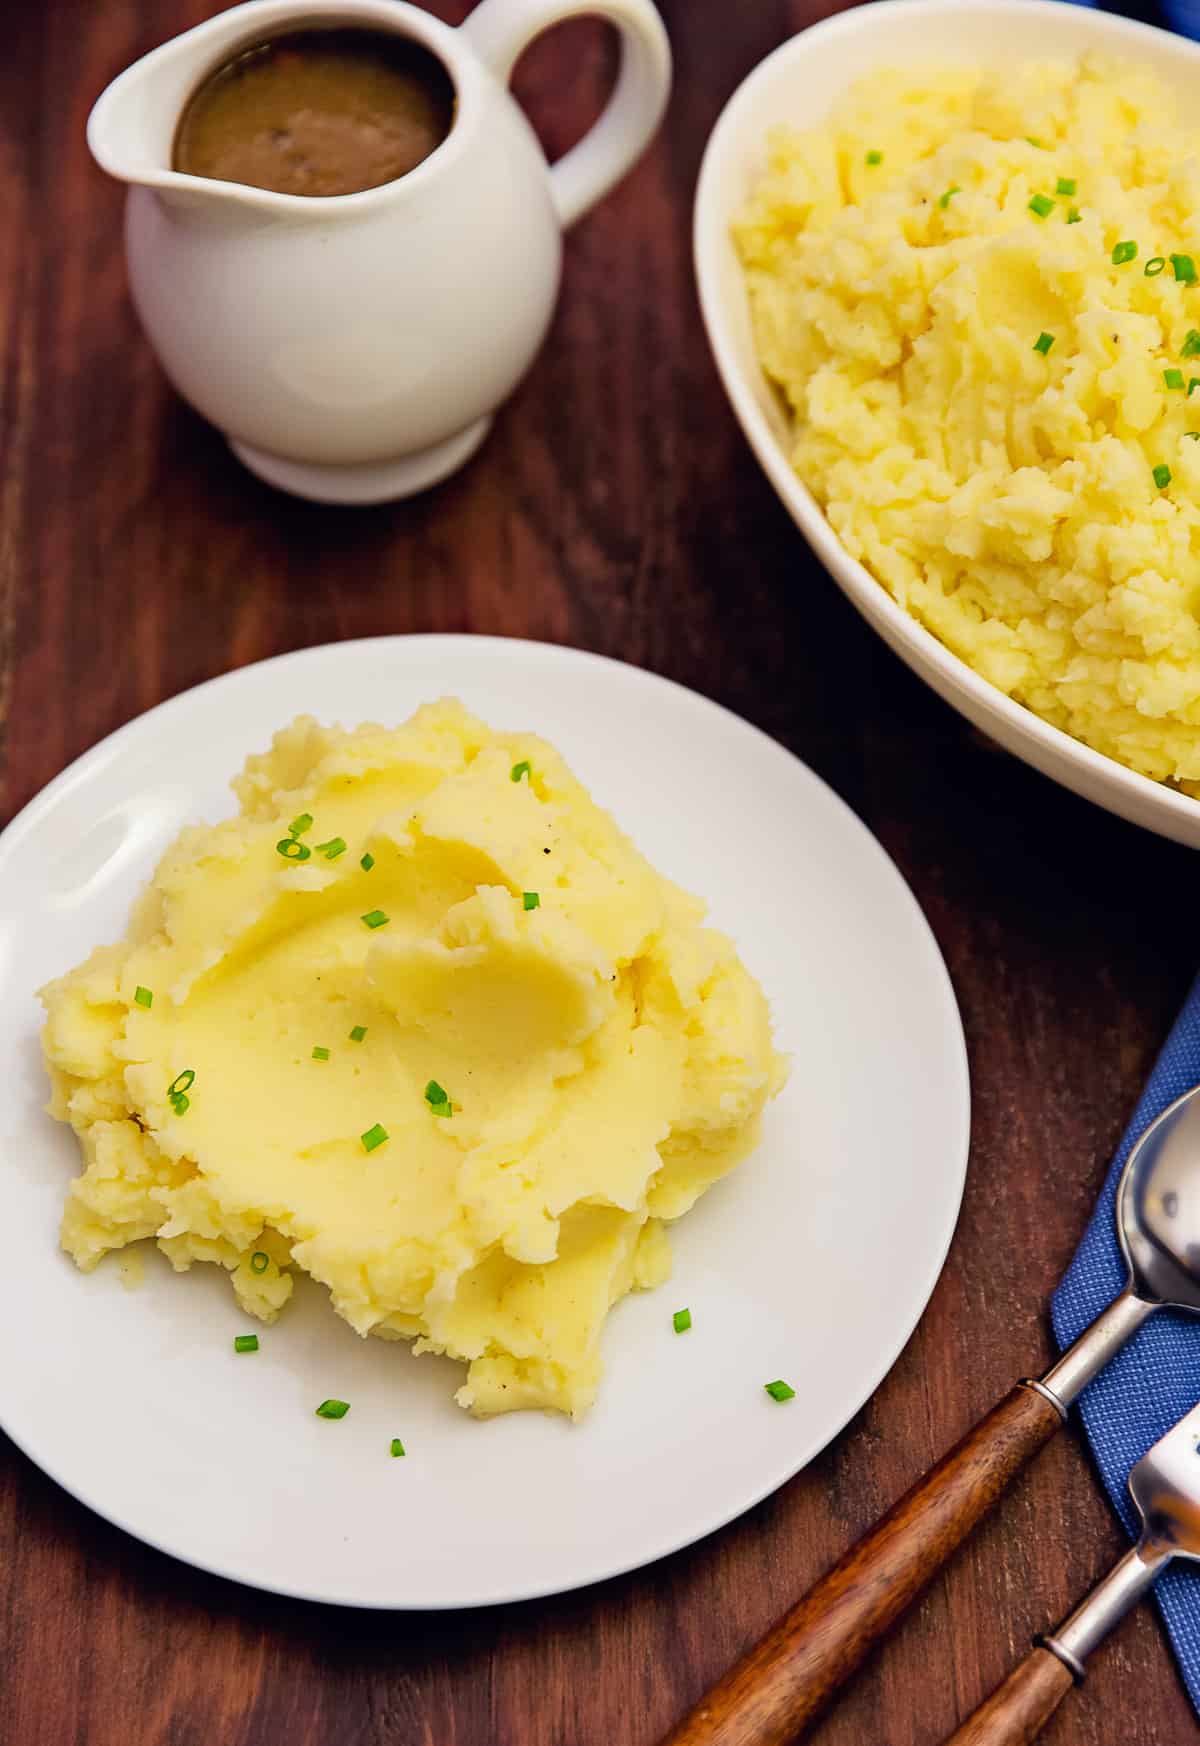 simple mashed potatoes, mashed potatoes, recipe, vegan, vegetarian, whole food plant based, wfpb, gluten free, oil free, refined sugar free, no oil, no refined sugar, no dairy, dinner, lunch, side, simple, healthy